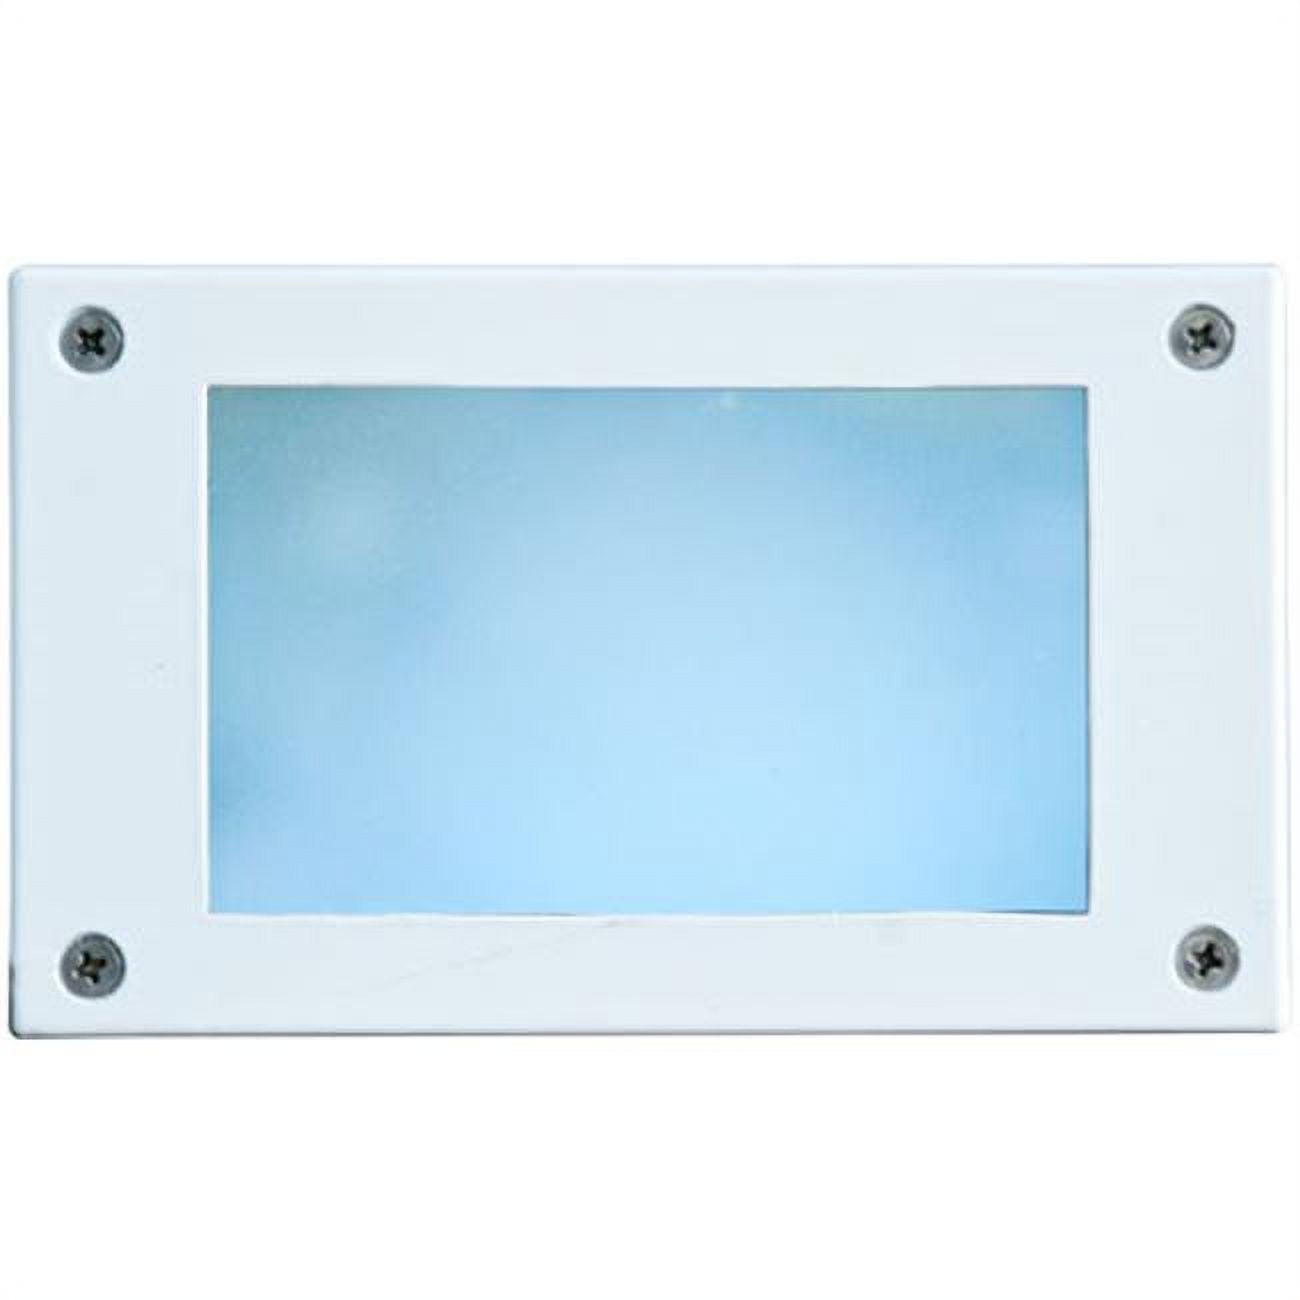 Picture of Dabmar Lighting LV650-W Cast Aluminum Recessed Open Face Brick, Step & Wall Light, White - 3.88 x 6.44 x 2.63 in.